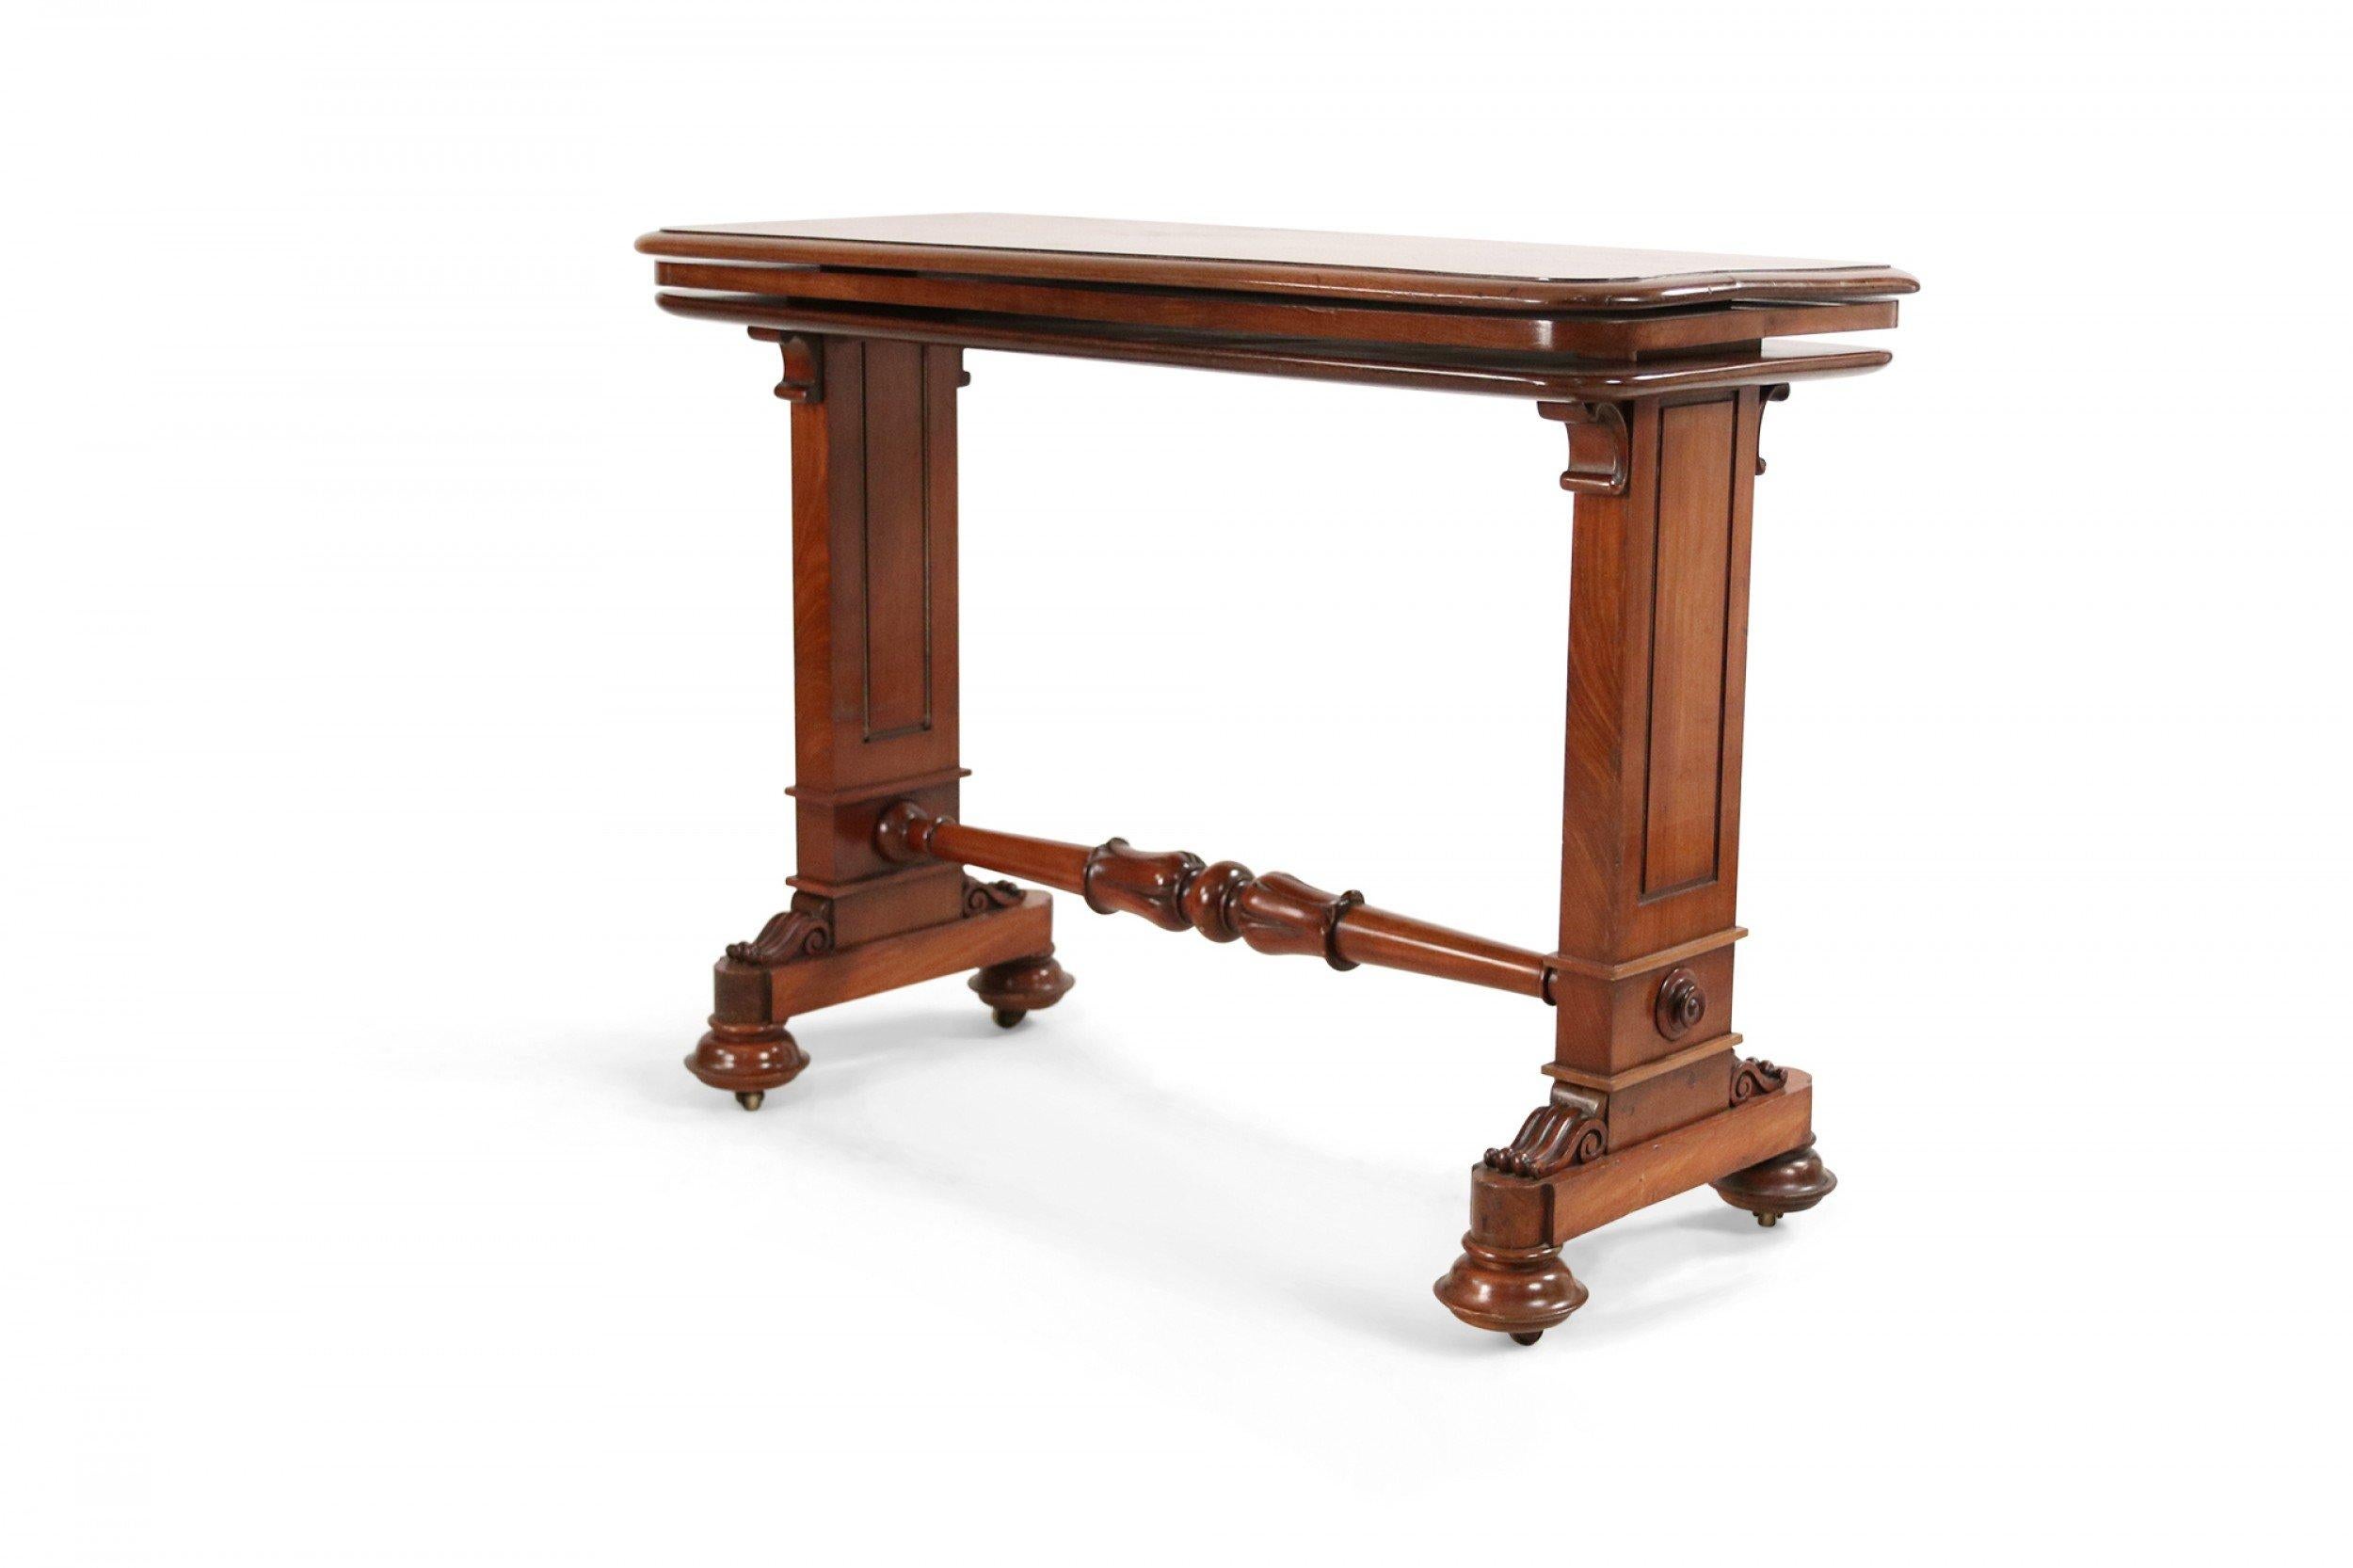 English William IV mahogany console table with rectangular top, rounded corners, and two carved legs connected by a turned, carved stretcher.